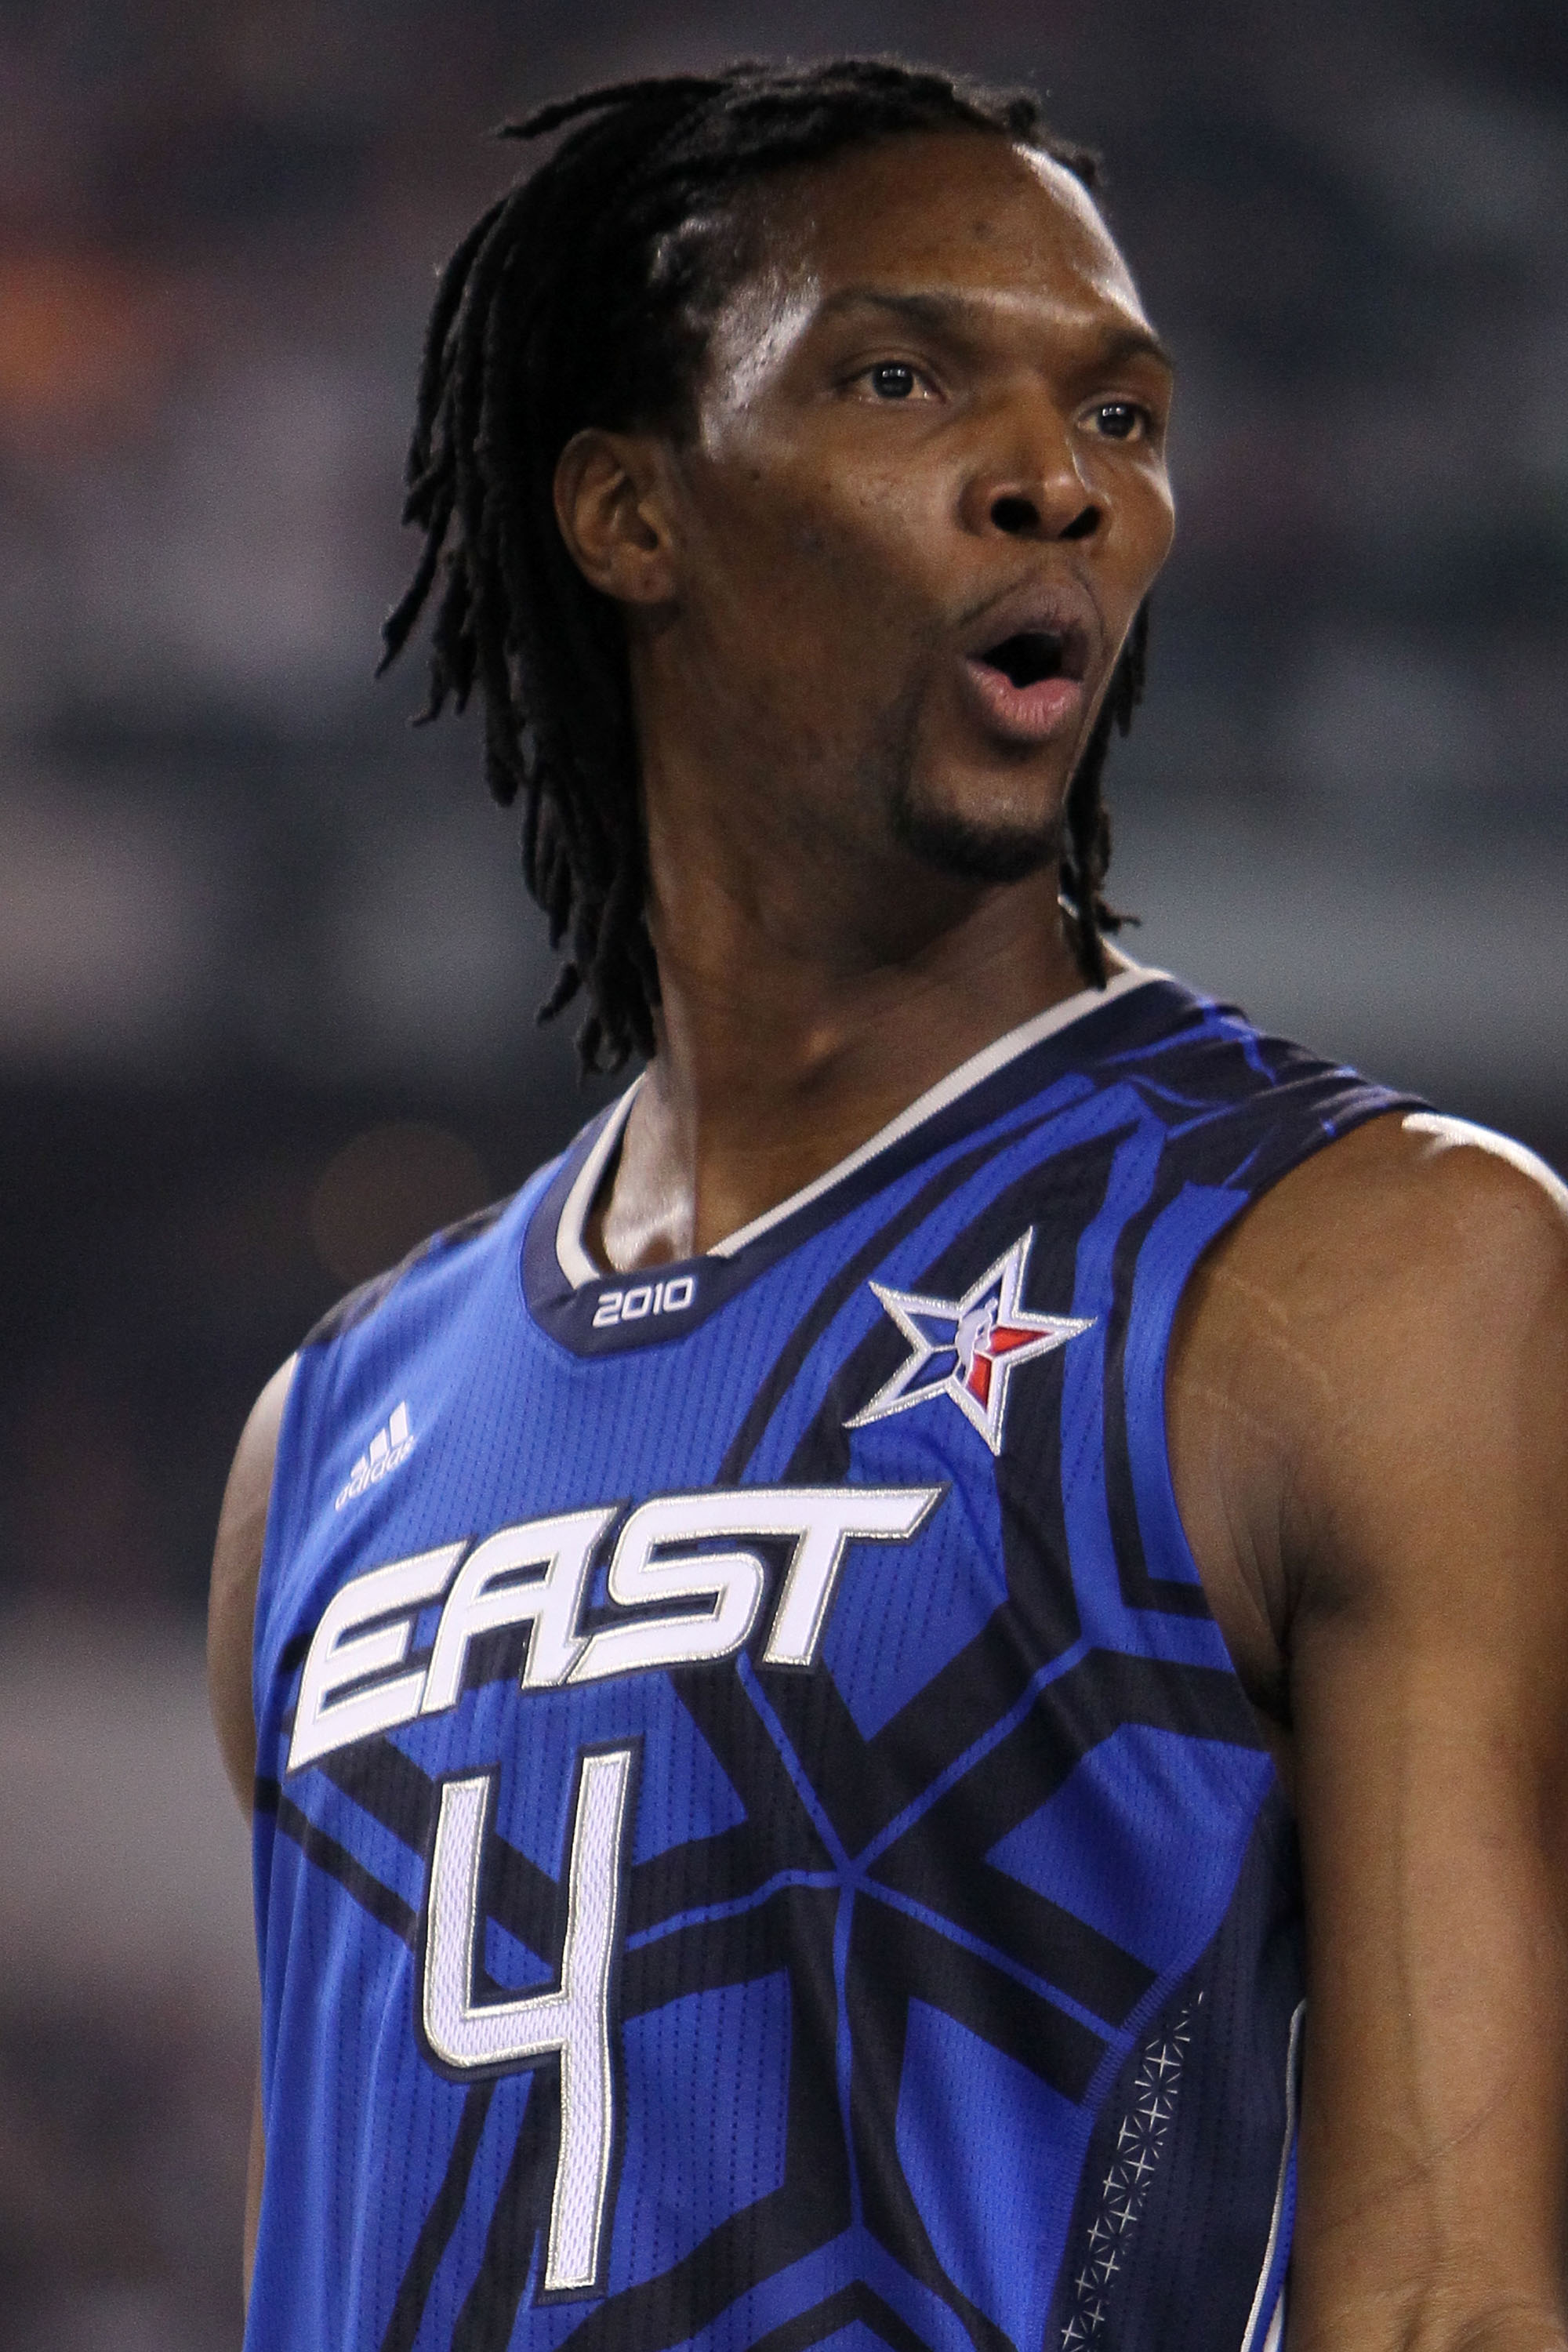 ARLINGTON, TX - FEBRUARY 14:  Chris Bosh #4 of the Eastern Conference reacts during the first half of the NBA All-Star Game, part of 2010 NBA All-Star Weekend at Cowboys Stadium on February 14, 2010 in Arlington, Texas. NOTE TO USER: User expressly acknow